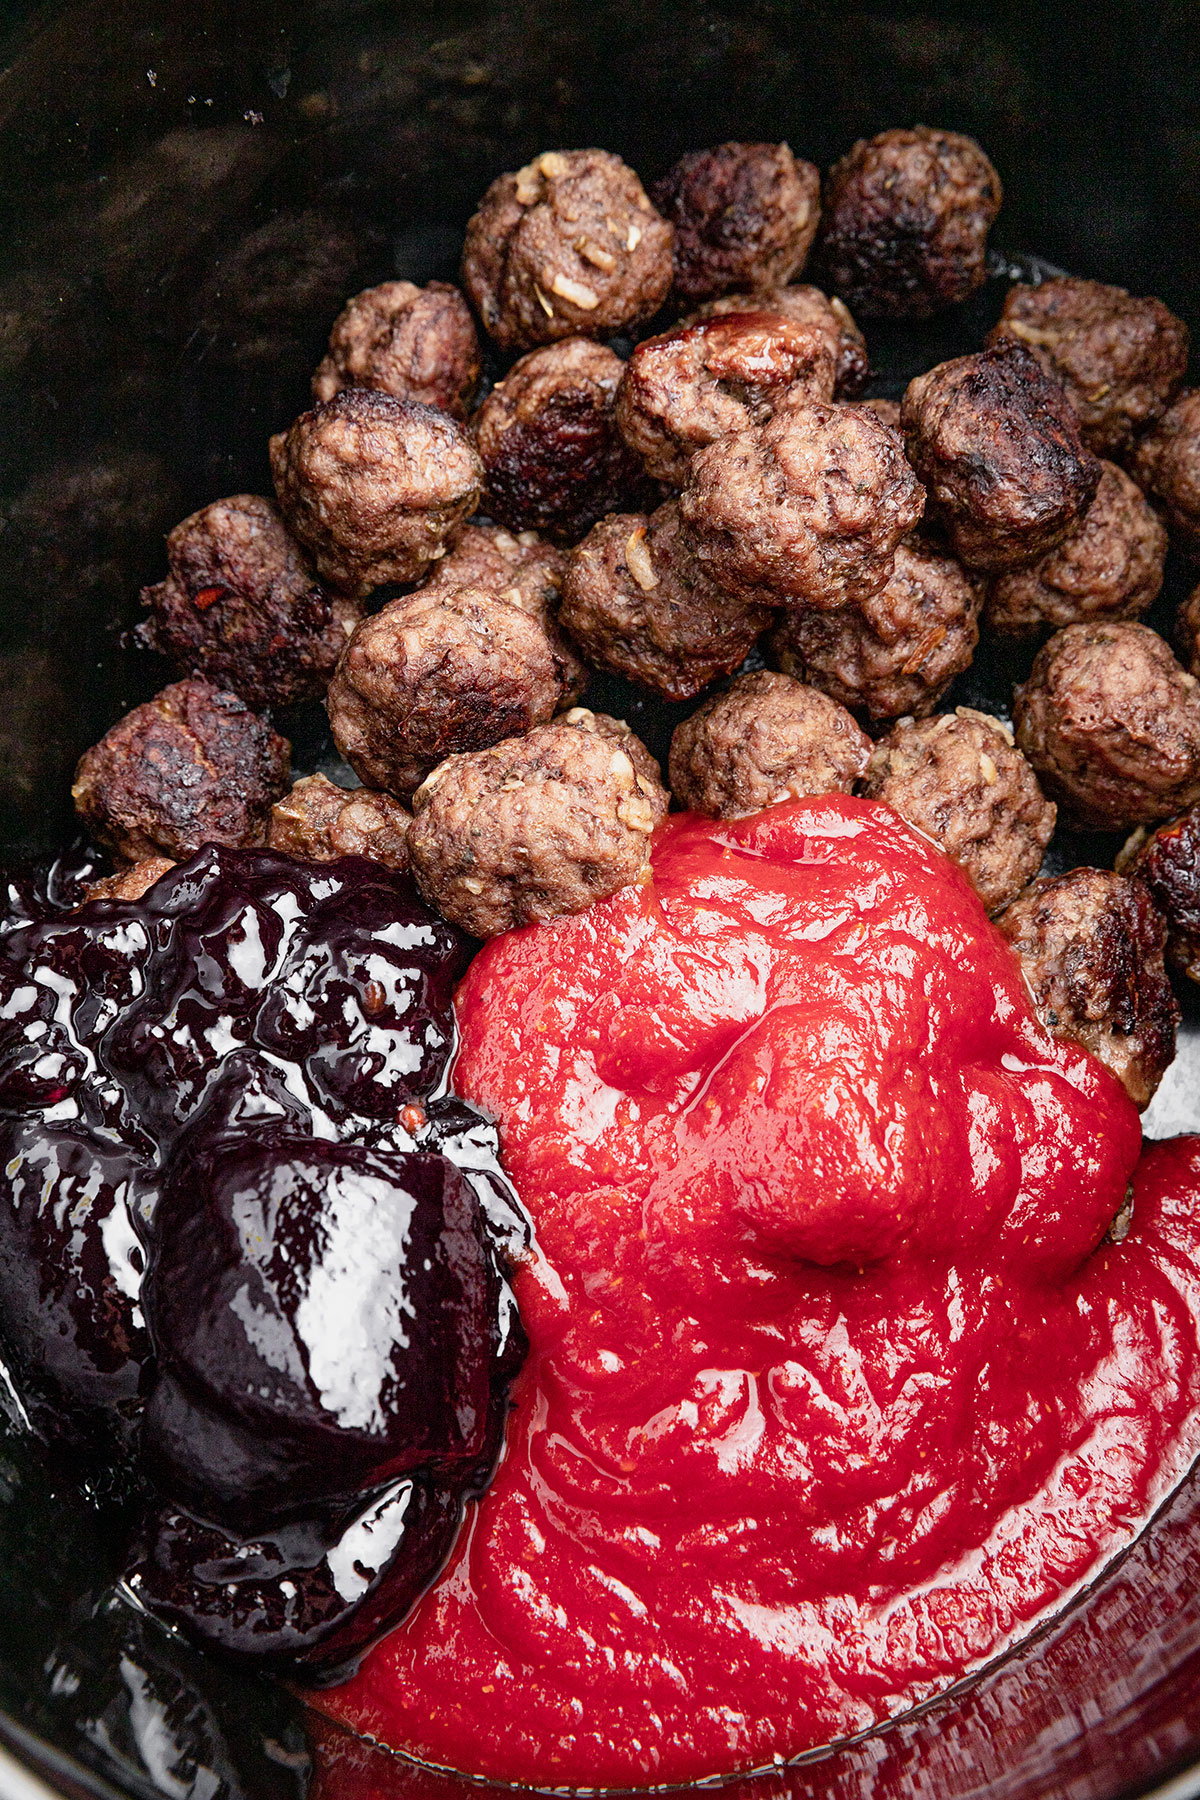 Pre-baked meatballs in a crock pot with chili sauce and grape jelly